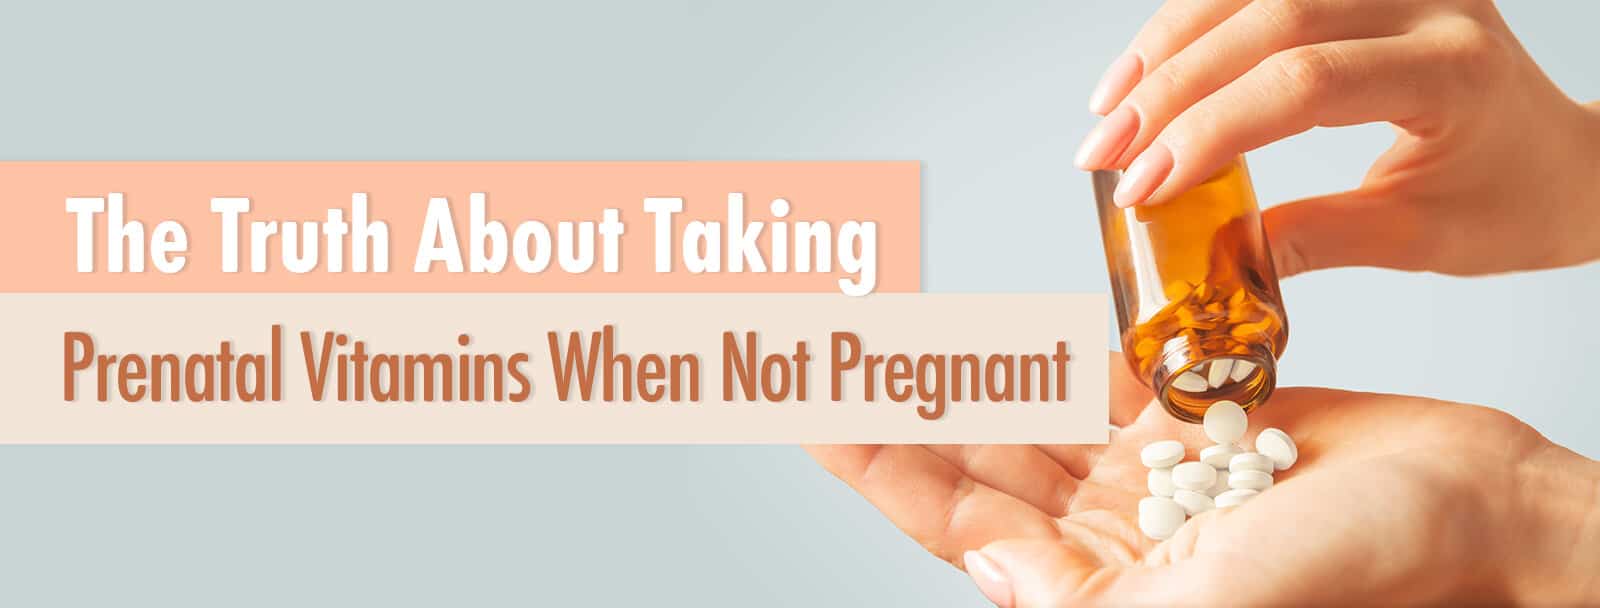 side effects of taking prenatal vitamins when not pregnant